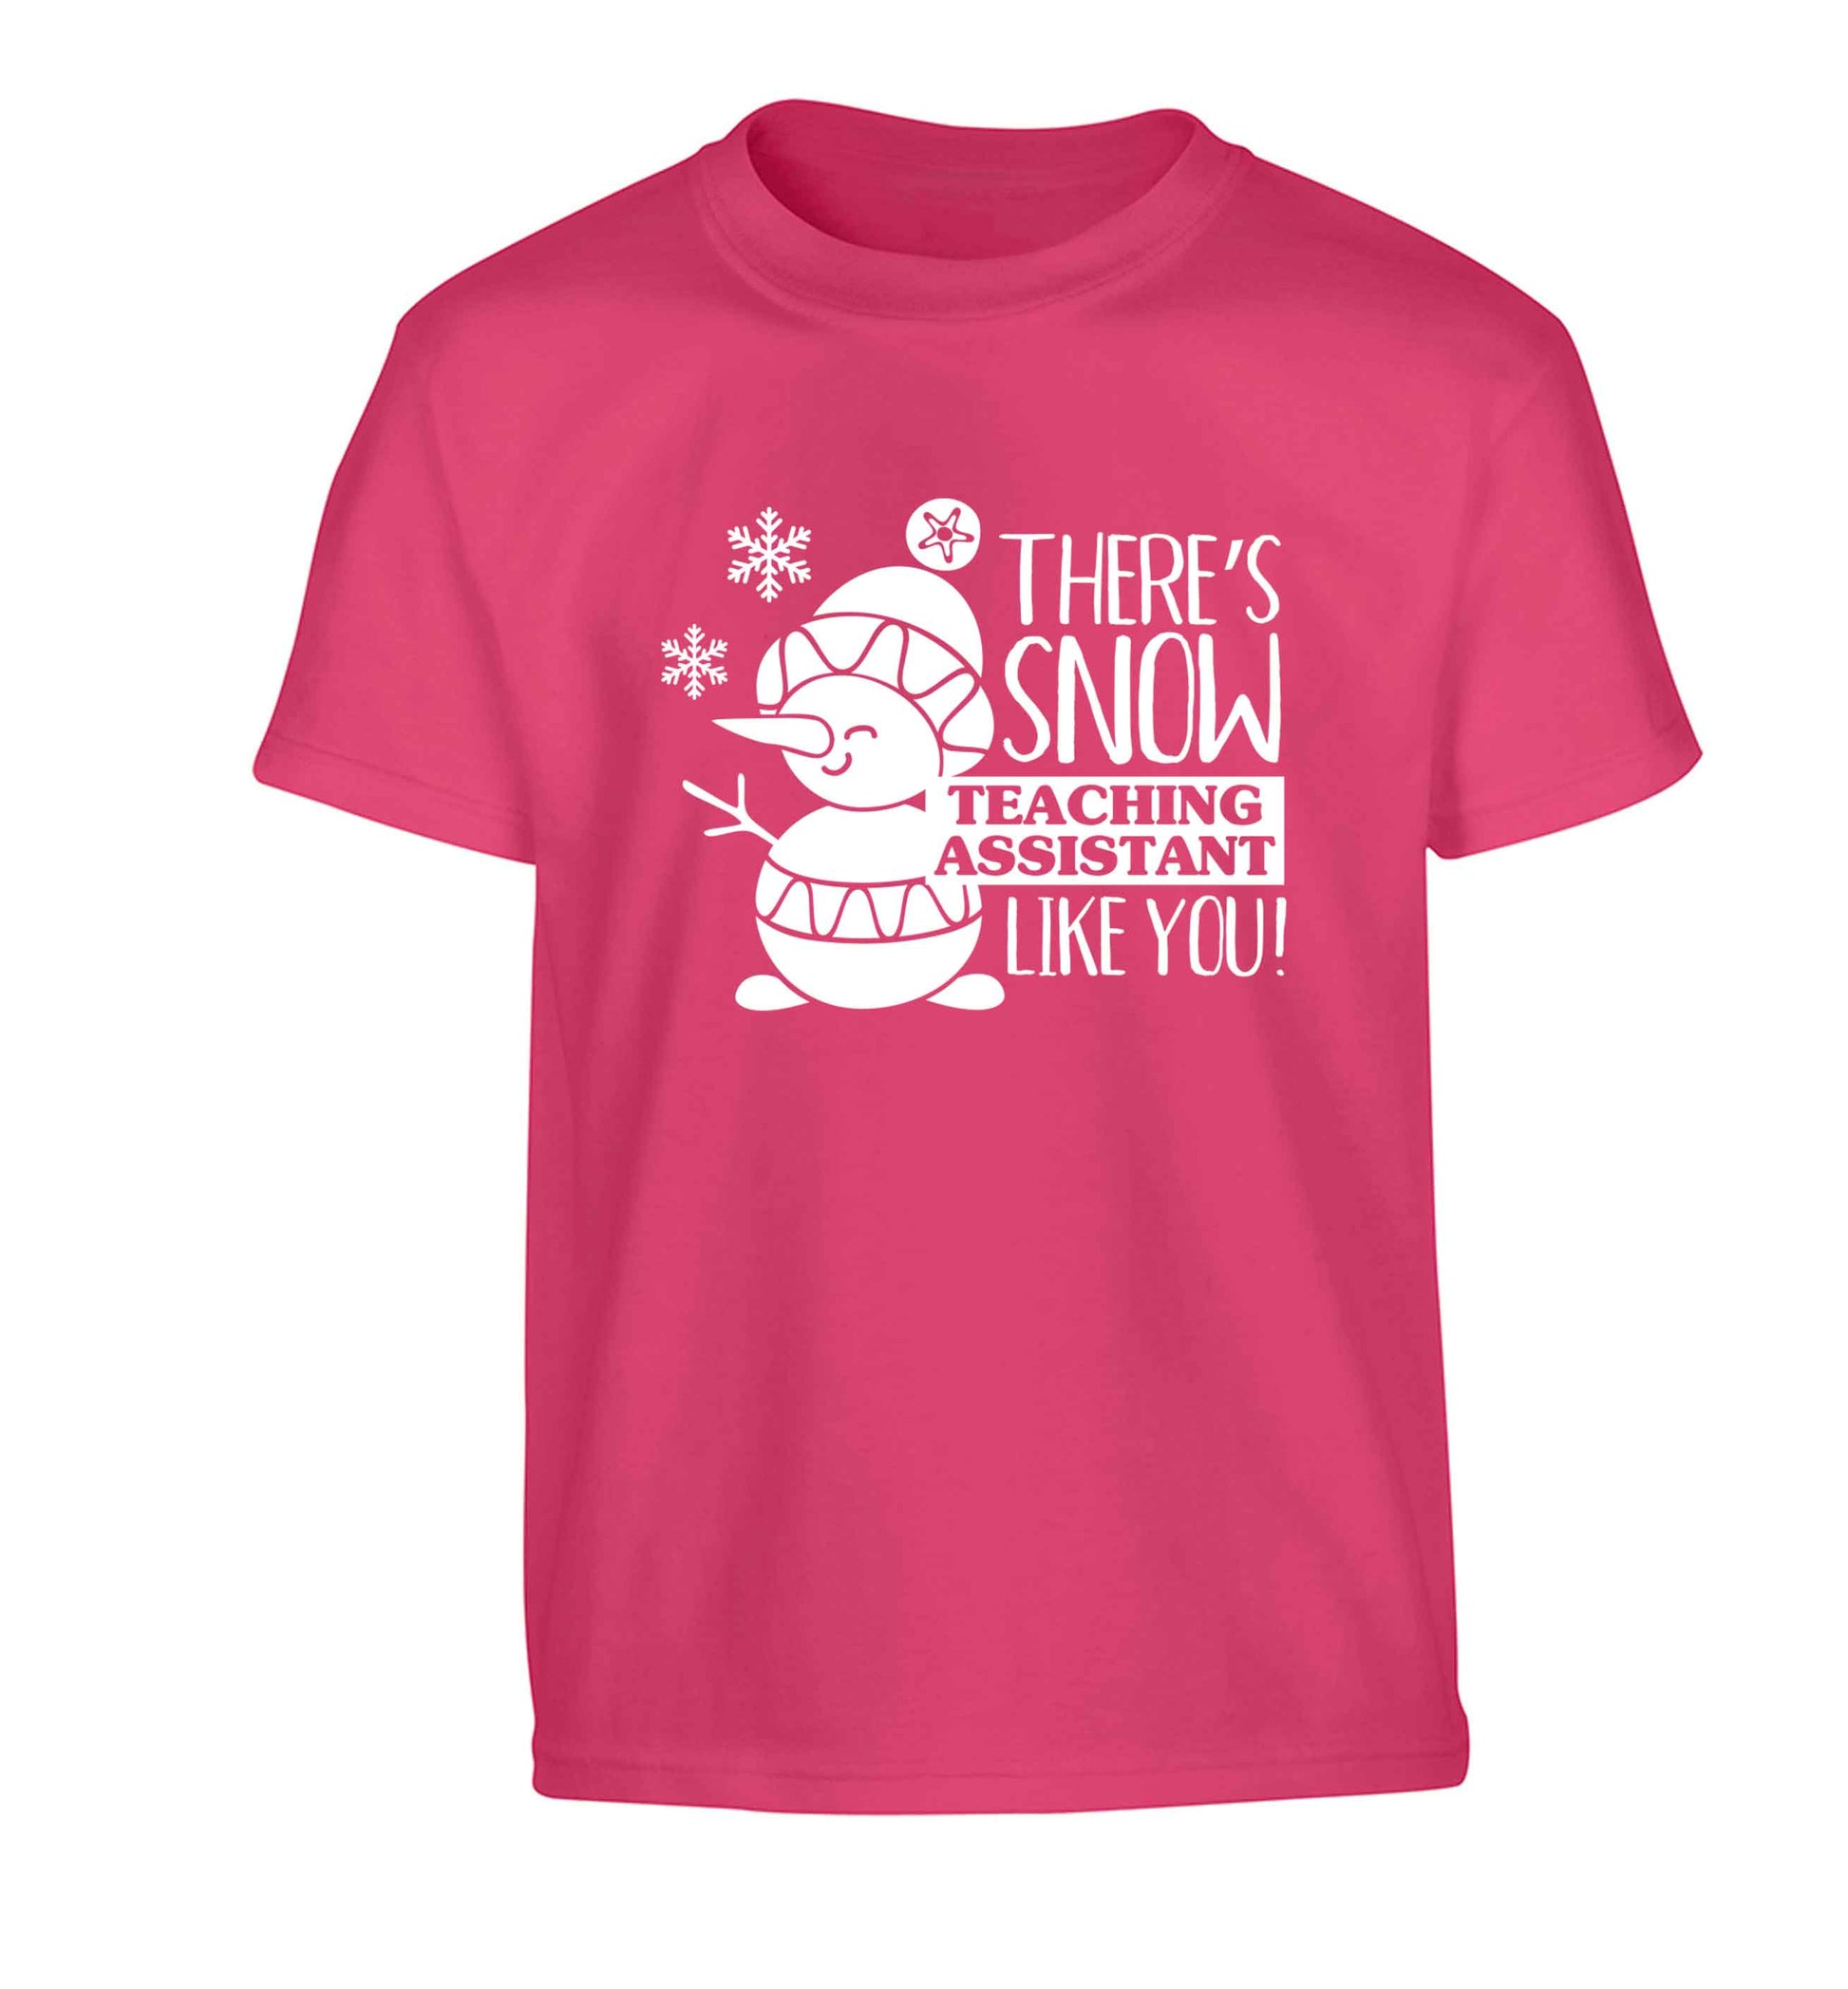 There's snow teaching assistant like you Children's pink Tshirt 12-13 Years